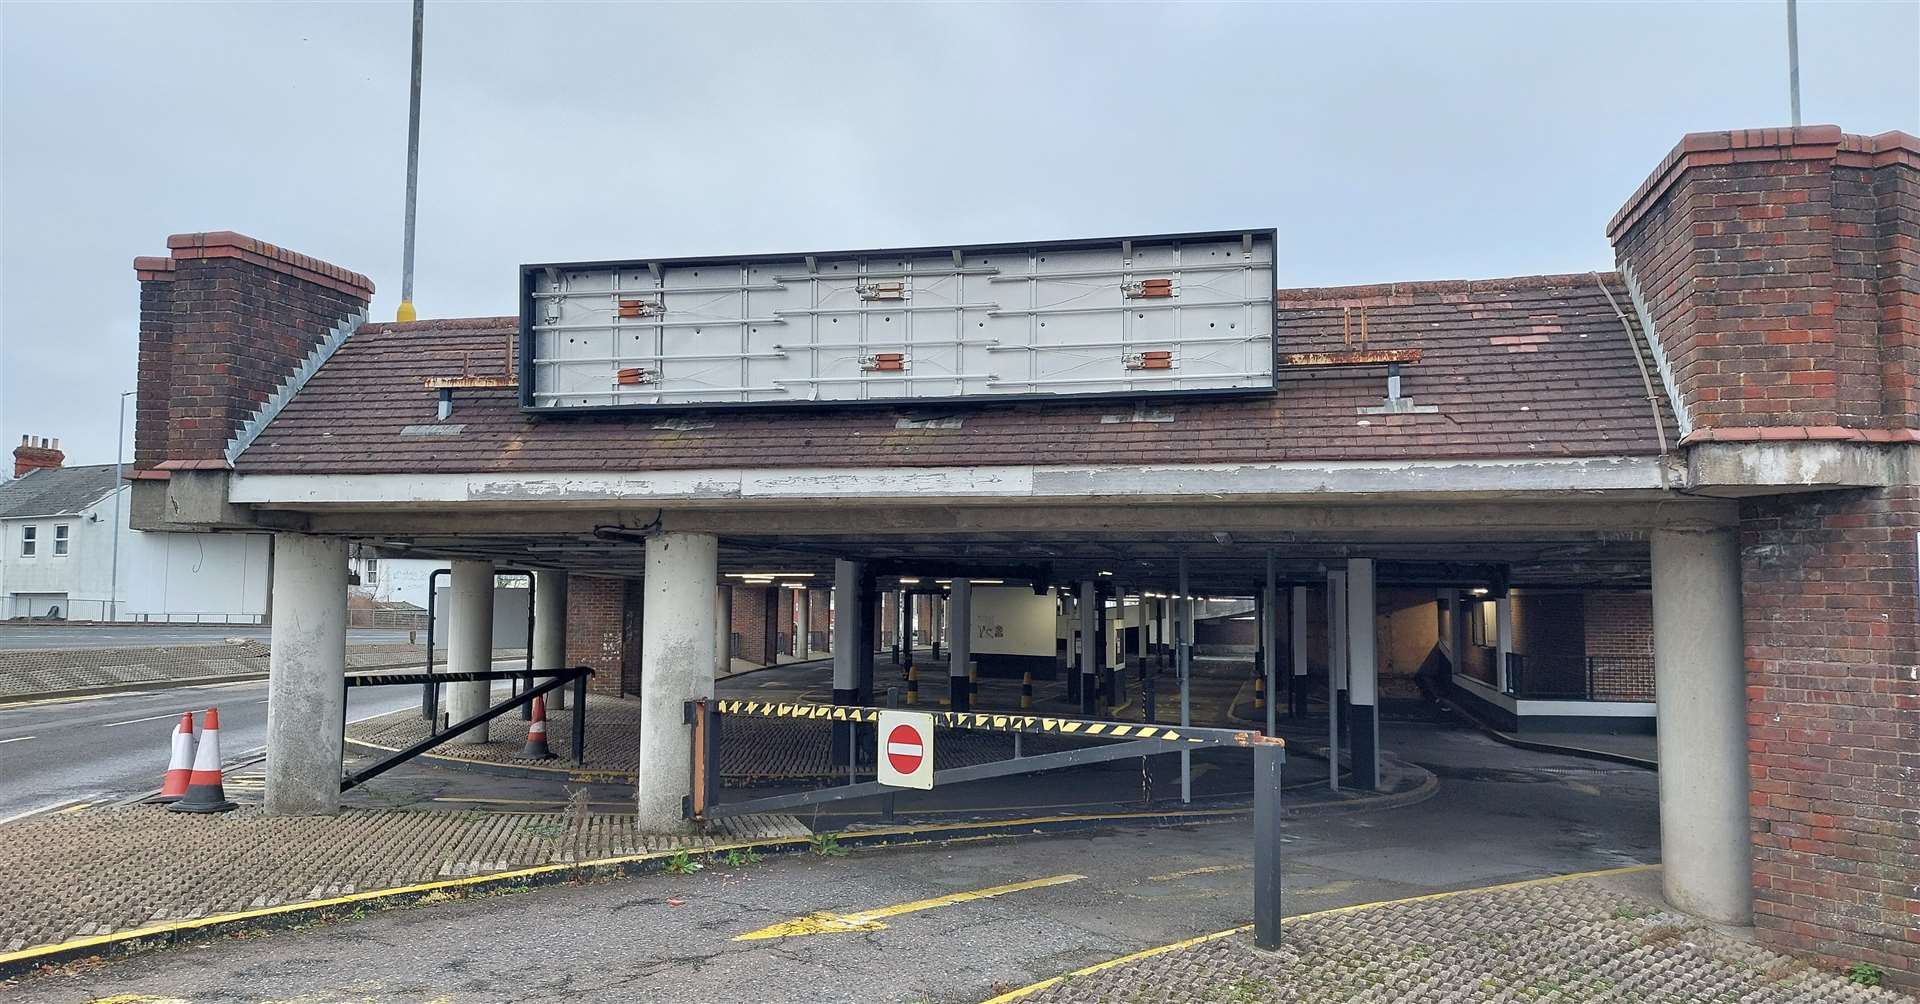 The first storey is set to be knocked down by Ashford Borough Council